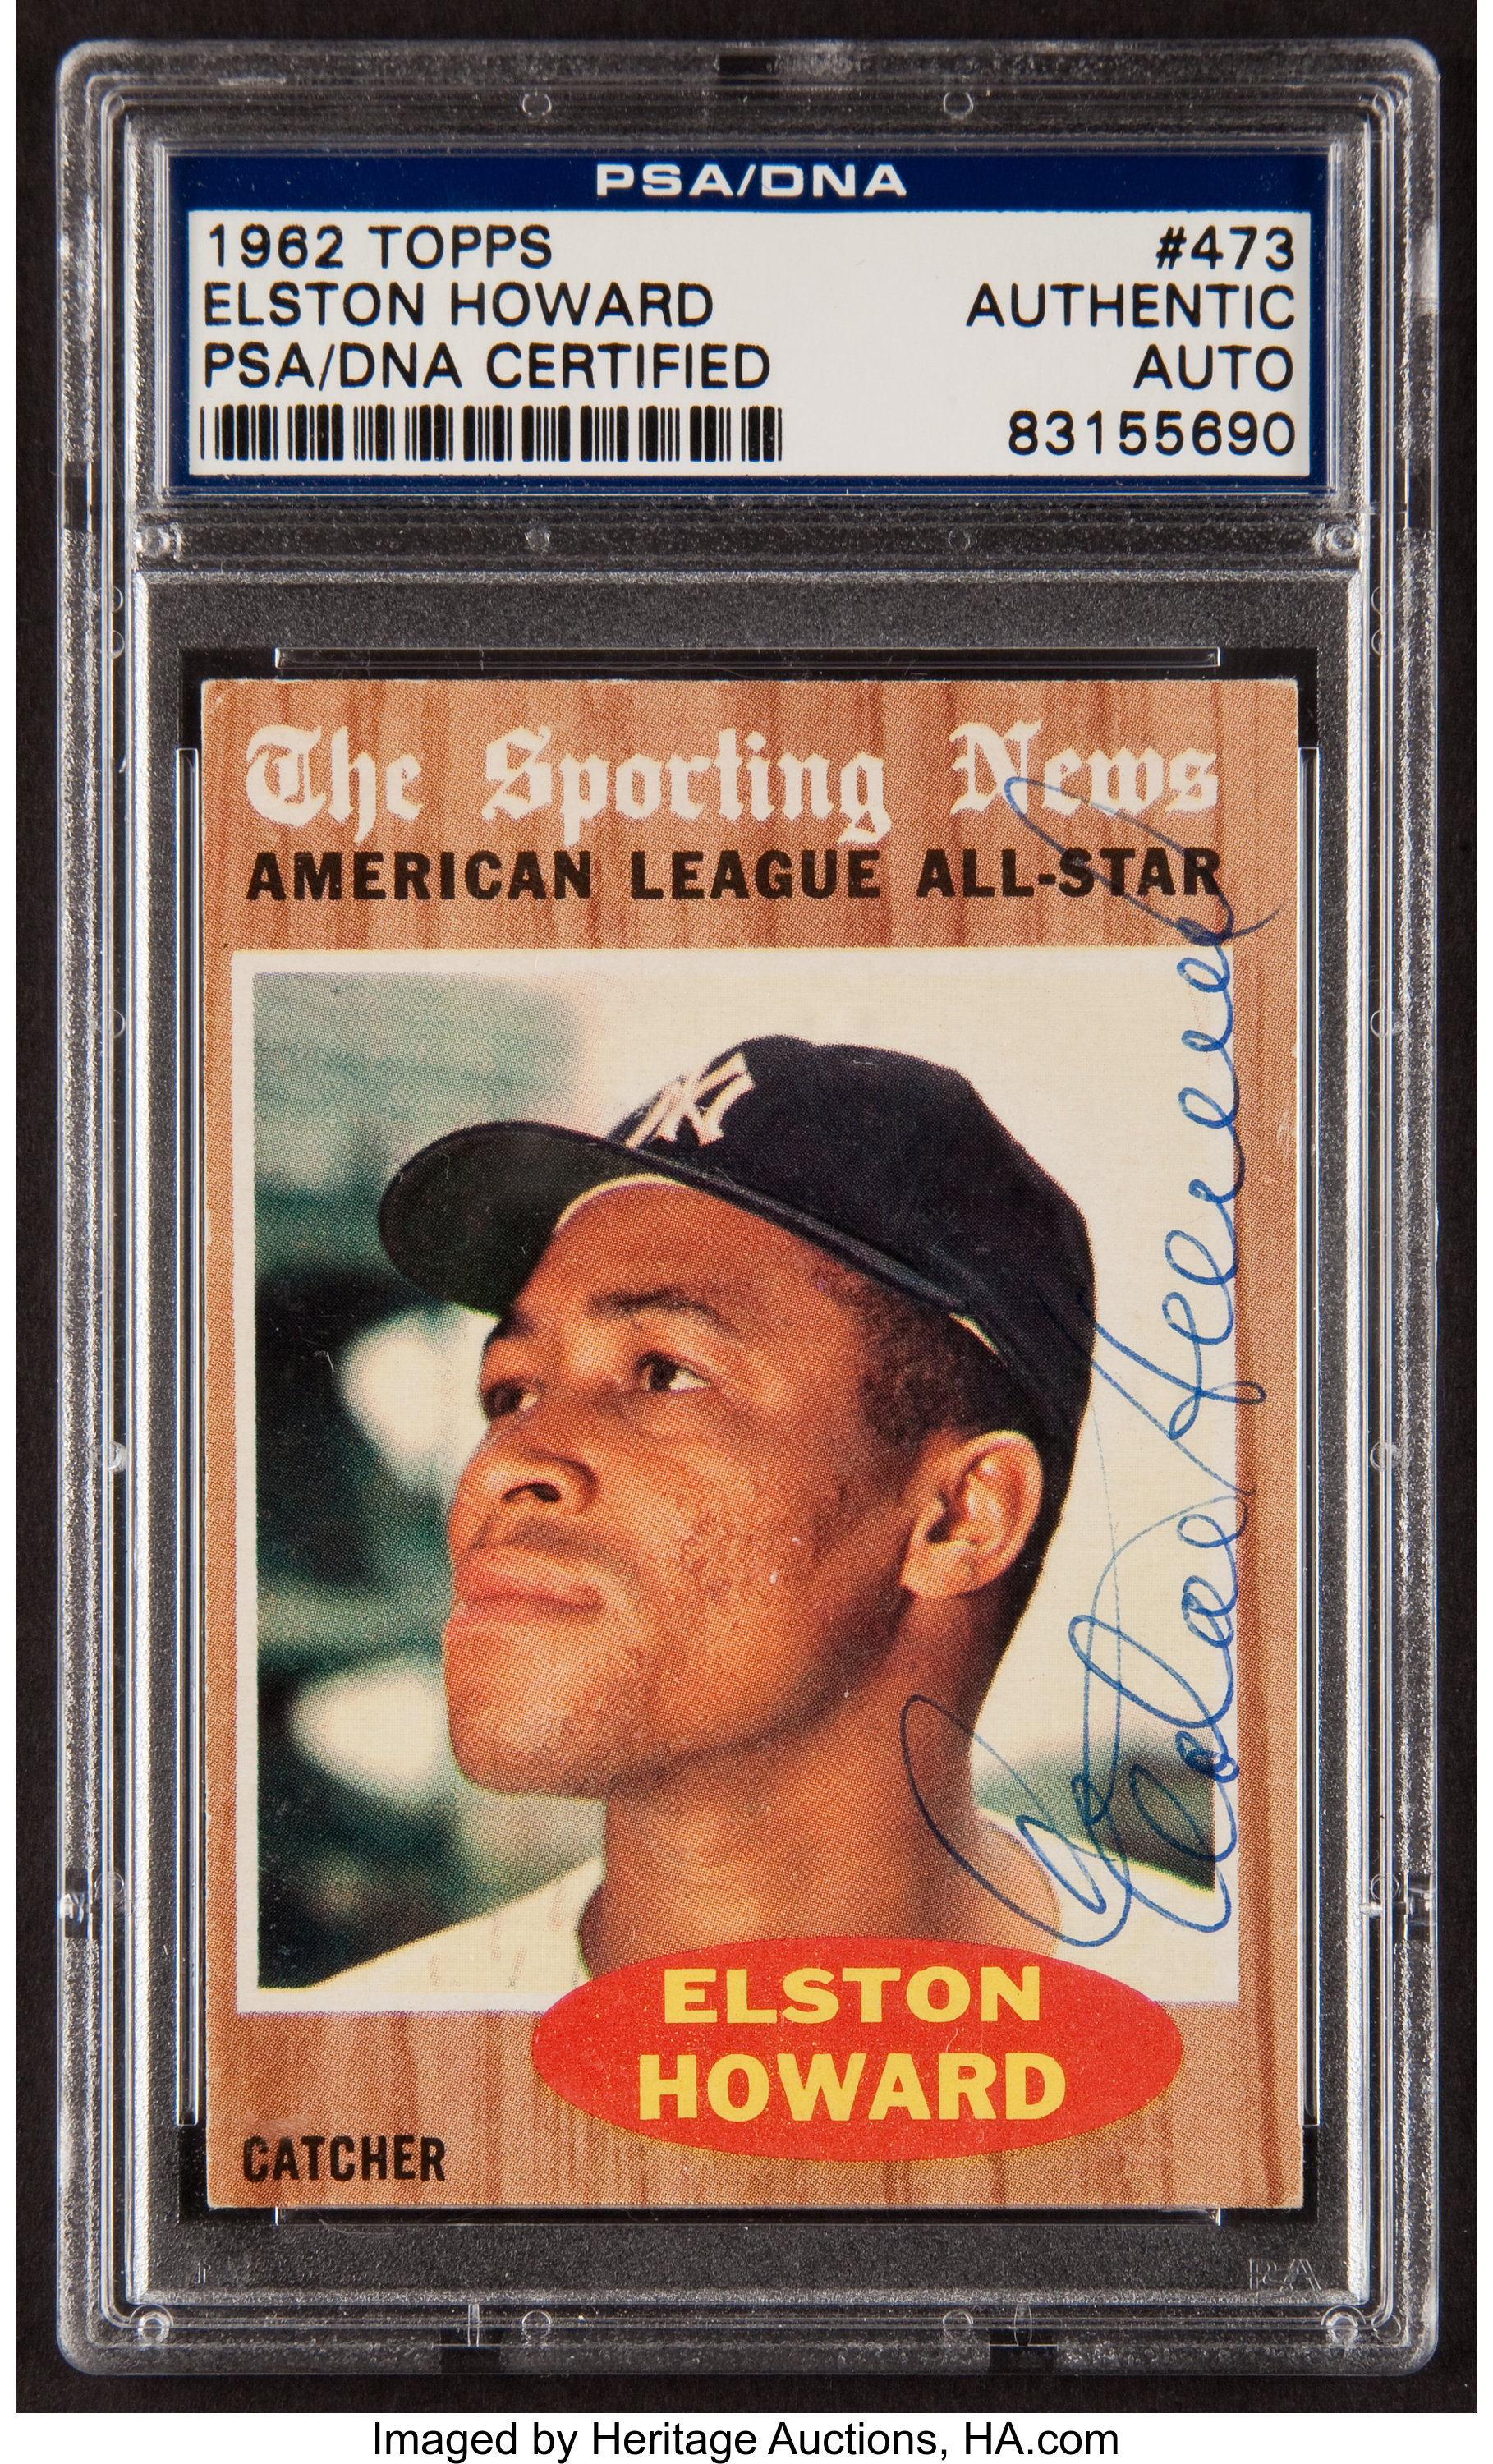 Signed 1962 Topps Elston Howard #473 PSA/DNA Authentic